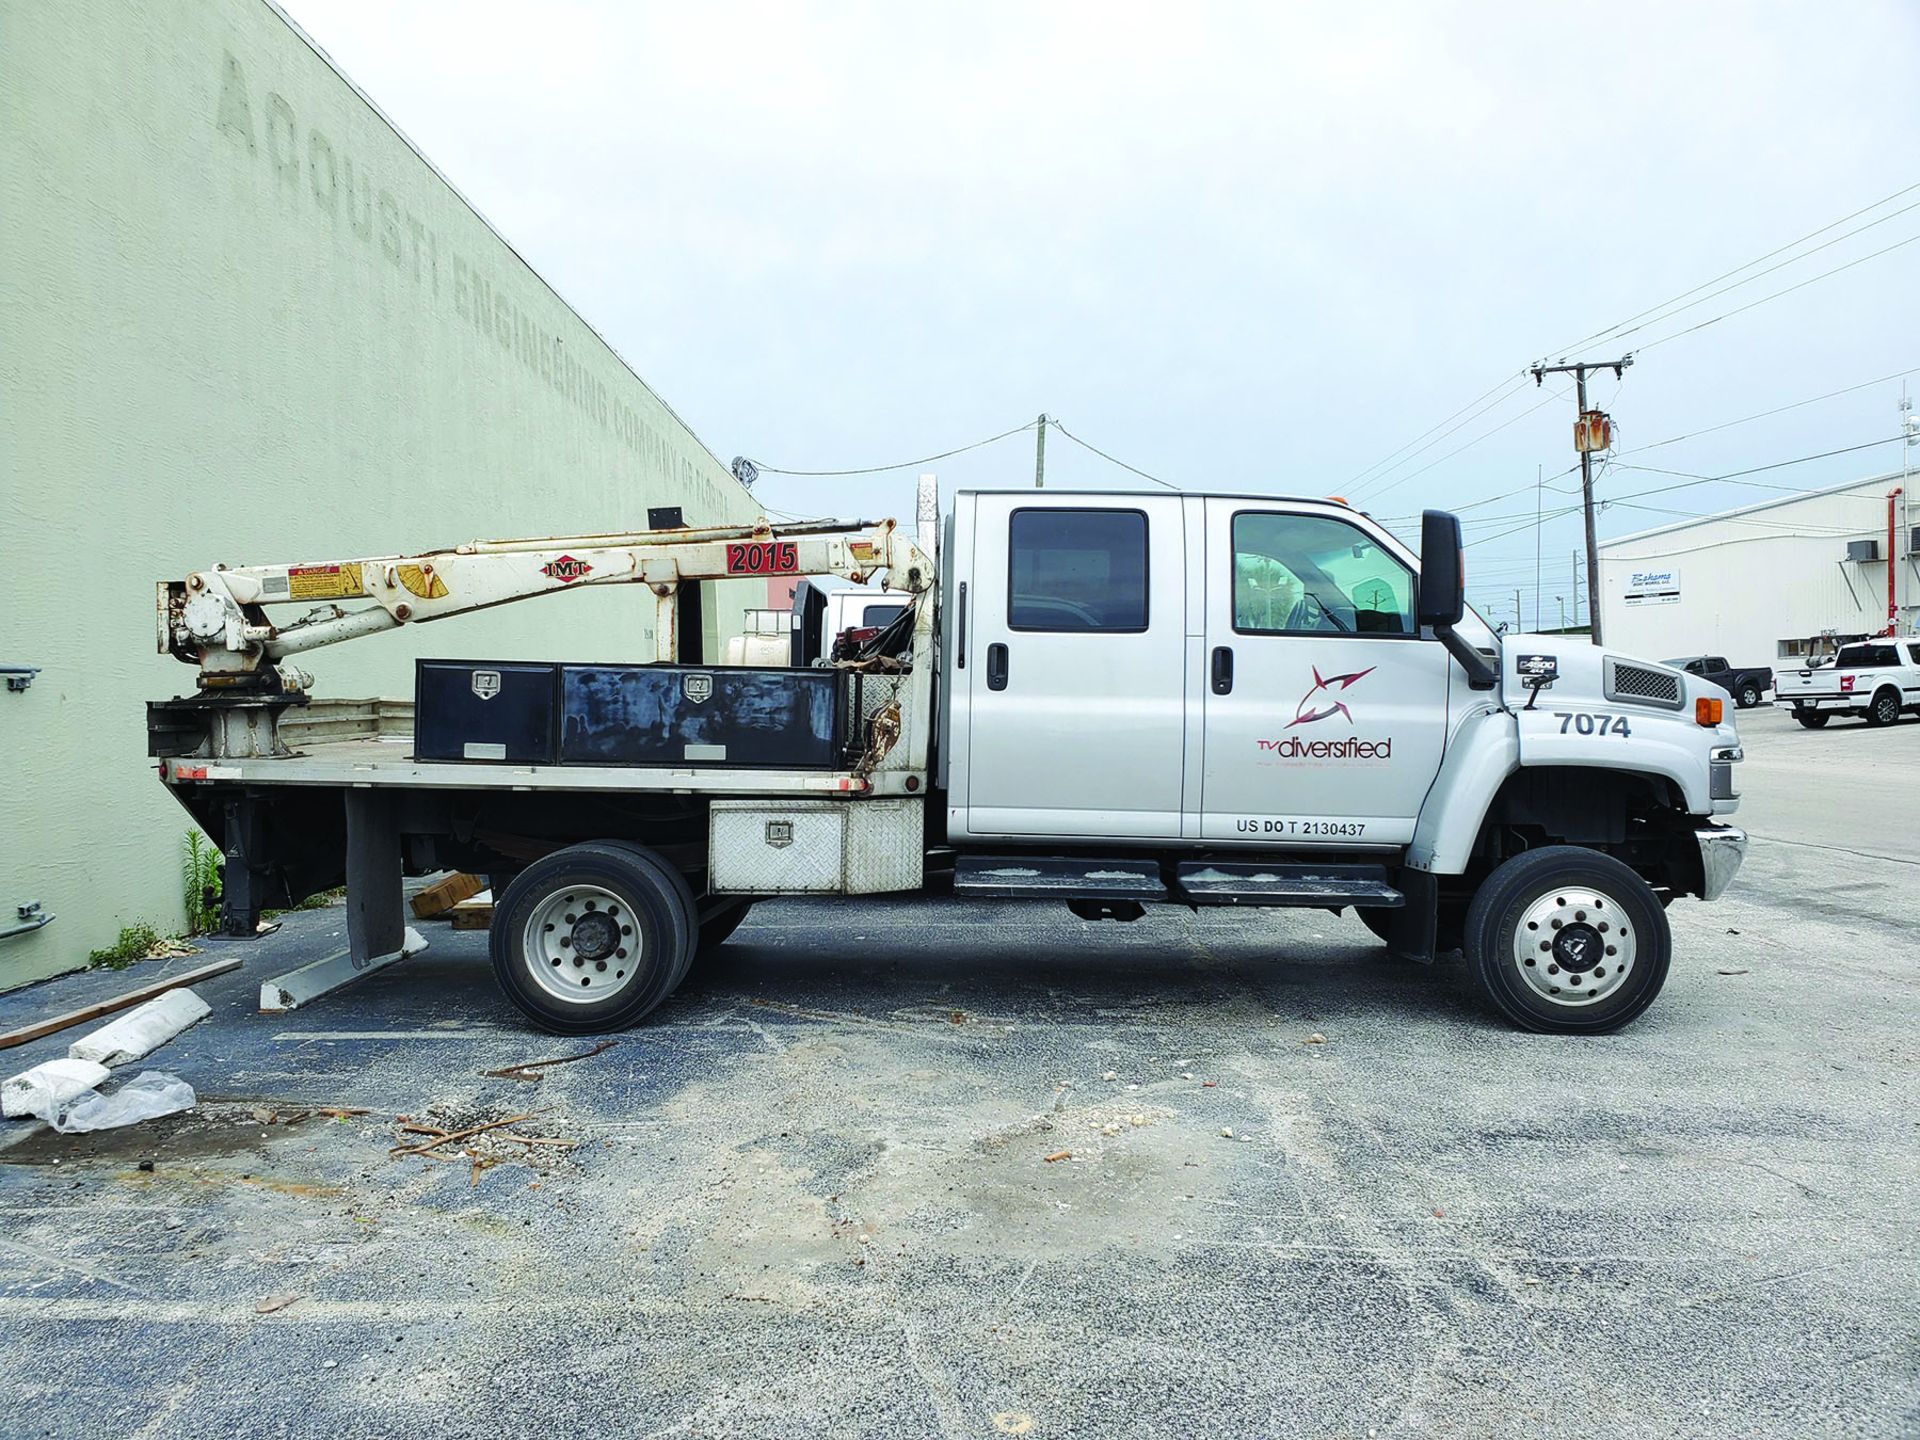 2006 CHEVROLET C4500 4X4 CREW CAB FLAT/STAKE BED TRUCK W/IMT 2015 TELESCOPING BOOM, 2.5 TON HOOK, - Image 6 of 19